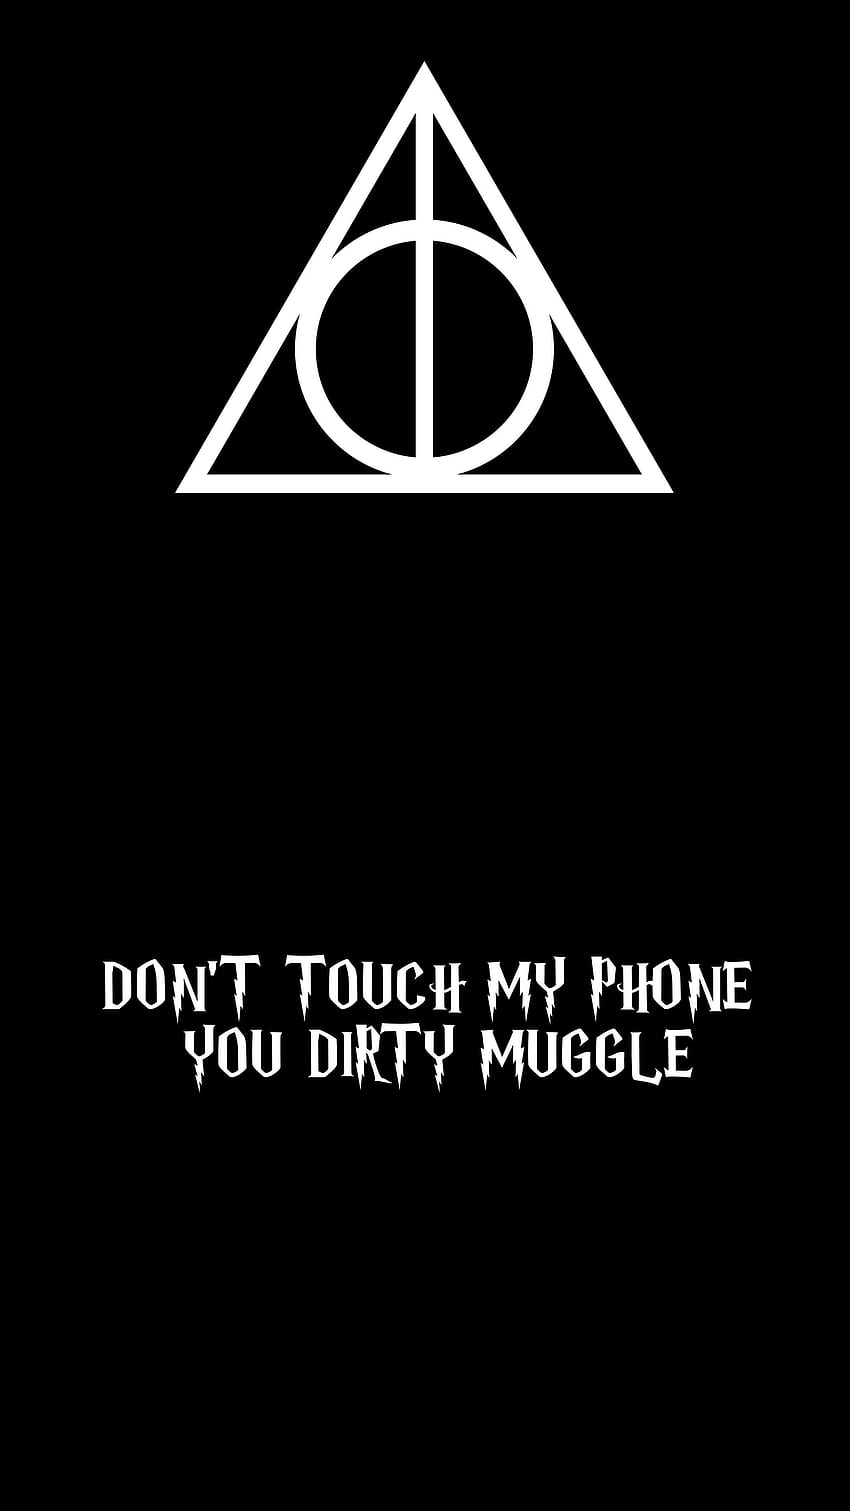 Here you guys go I made a nice black so you can even use it at night and not blind yourselves: harrypotter, Black Harry Potter HD phone wallpaper